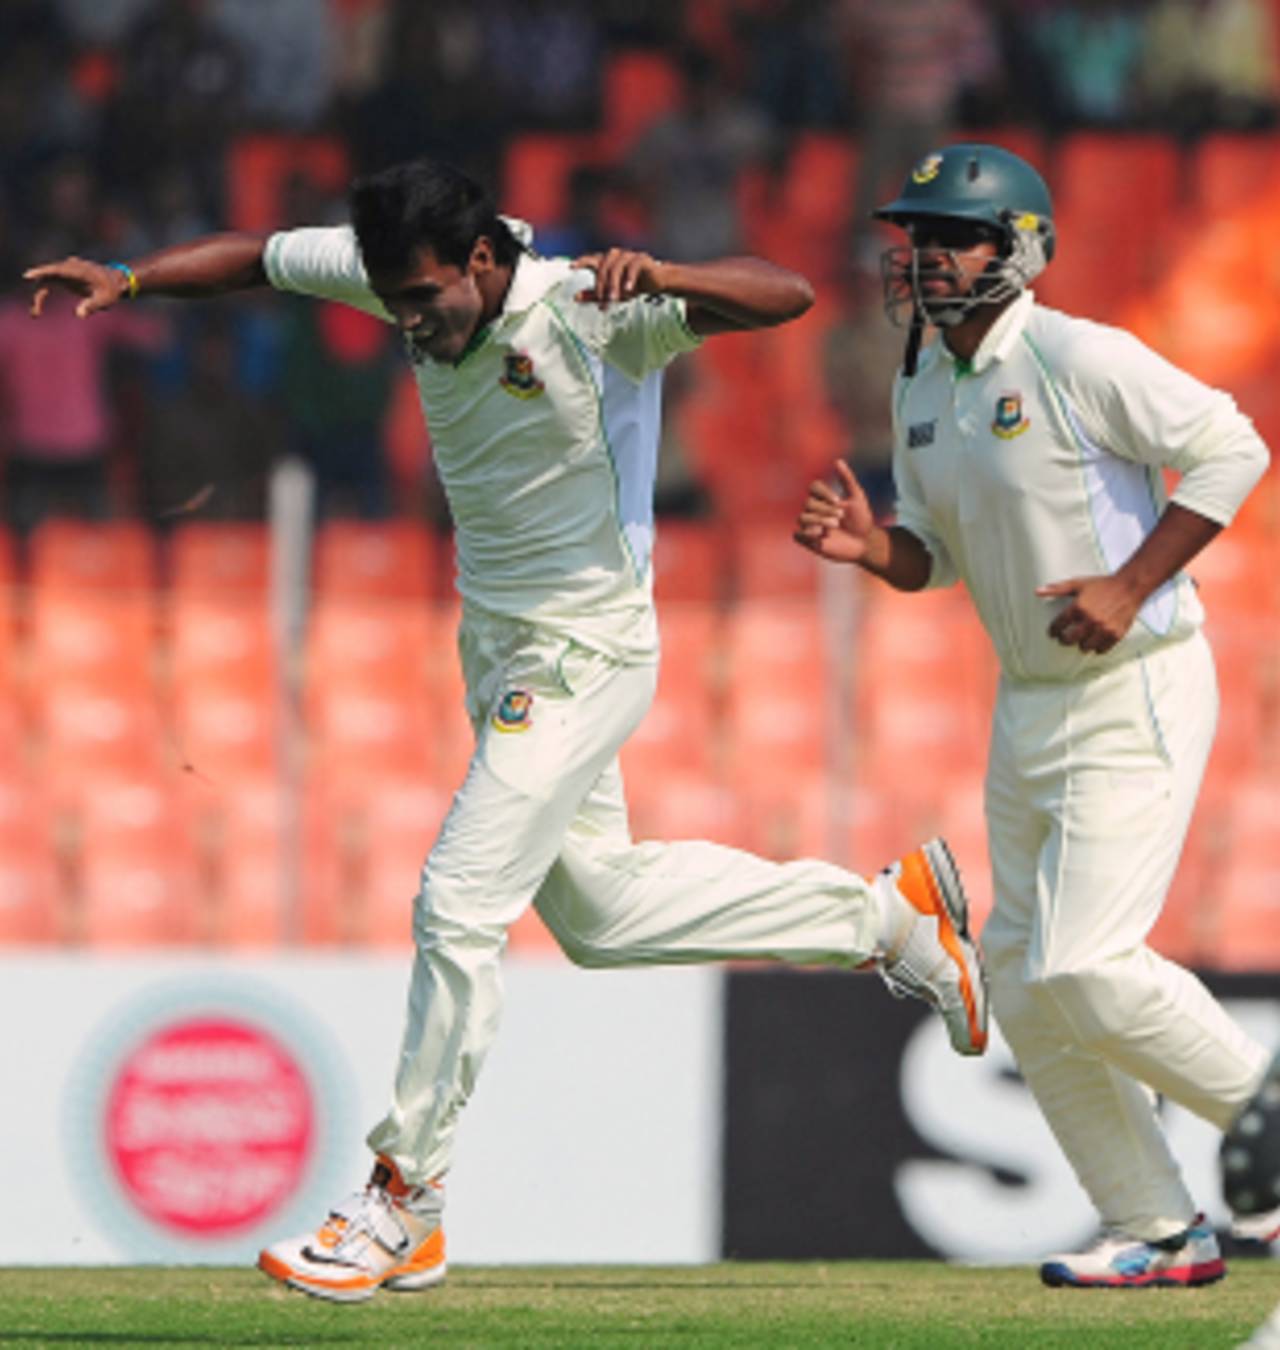 Although he bowled well, Rubel Hossain didn't have much joy on the Khulna pitch&nbsp;&nbsp;&bull;&nbsp;&nbsp;AFP